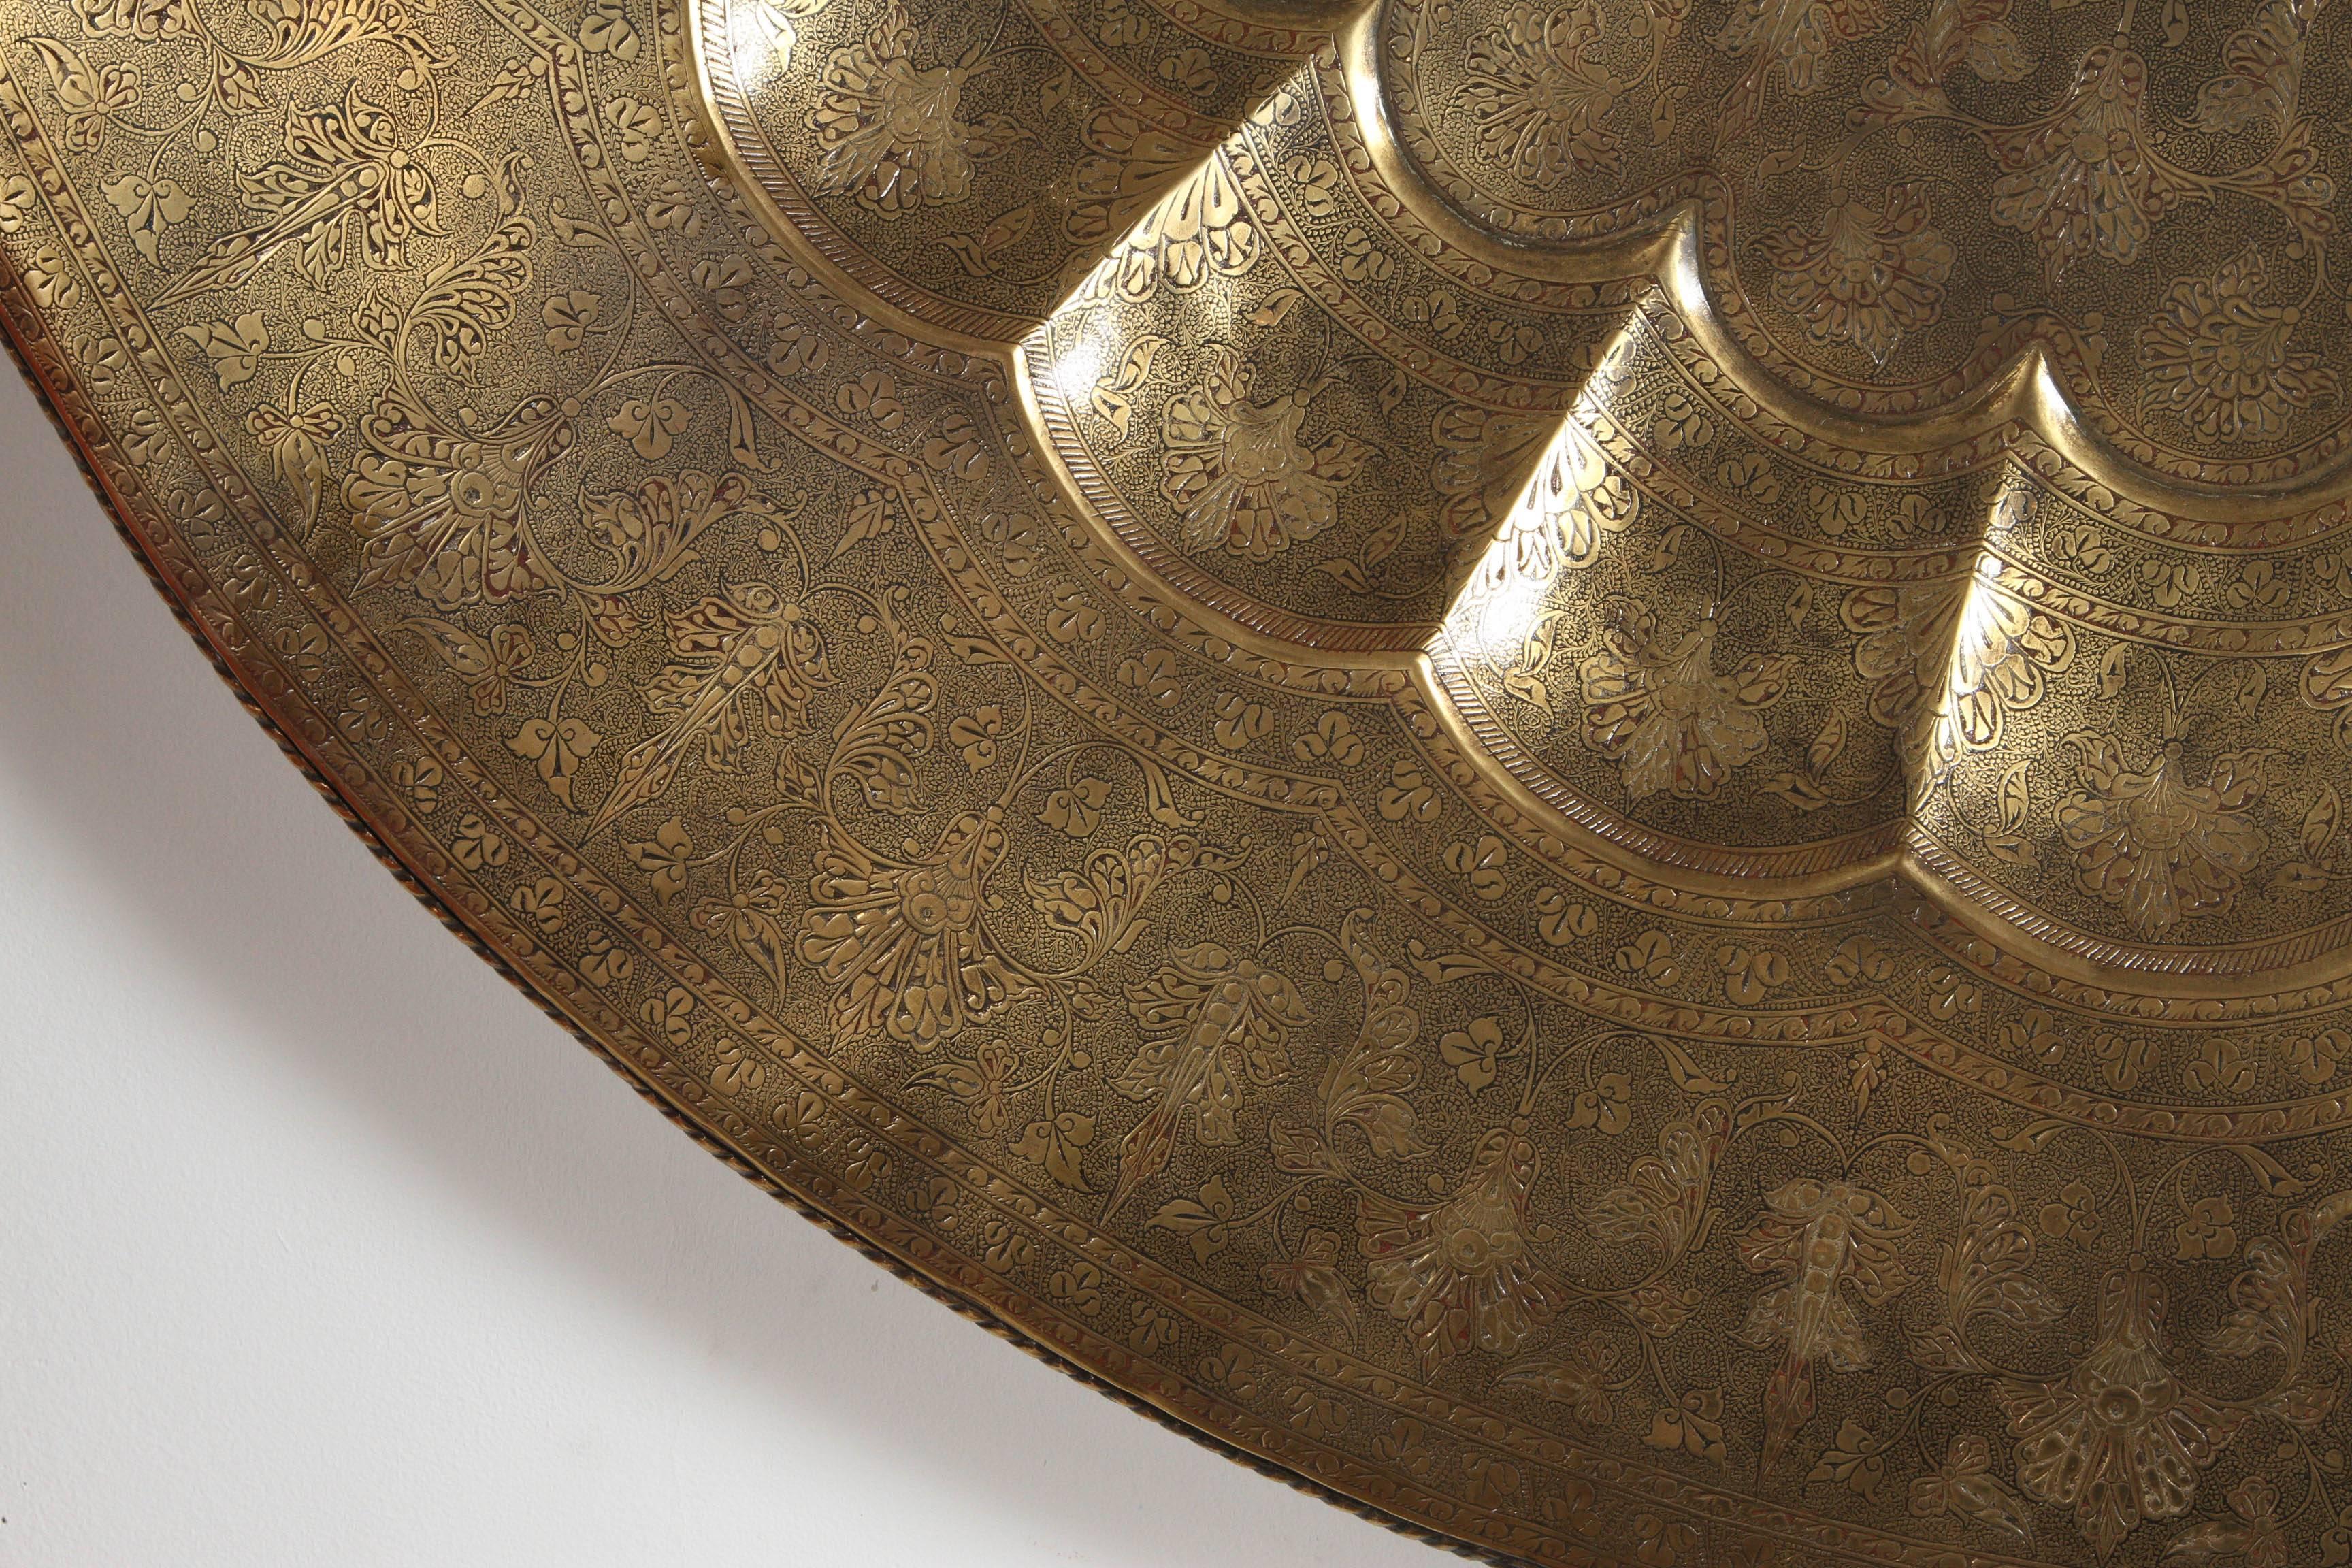 Hand-Carved Monumental Mughal-Indian Brass Hanging Tray Platter 47 Inches Diameter